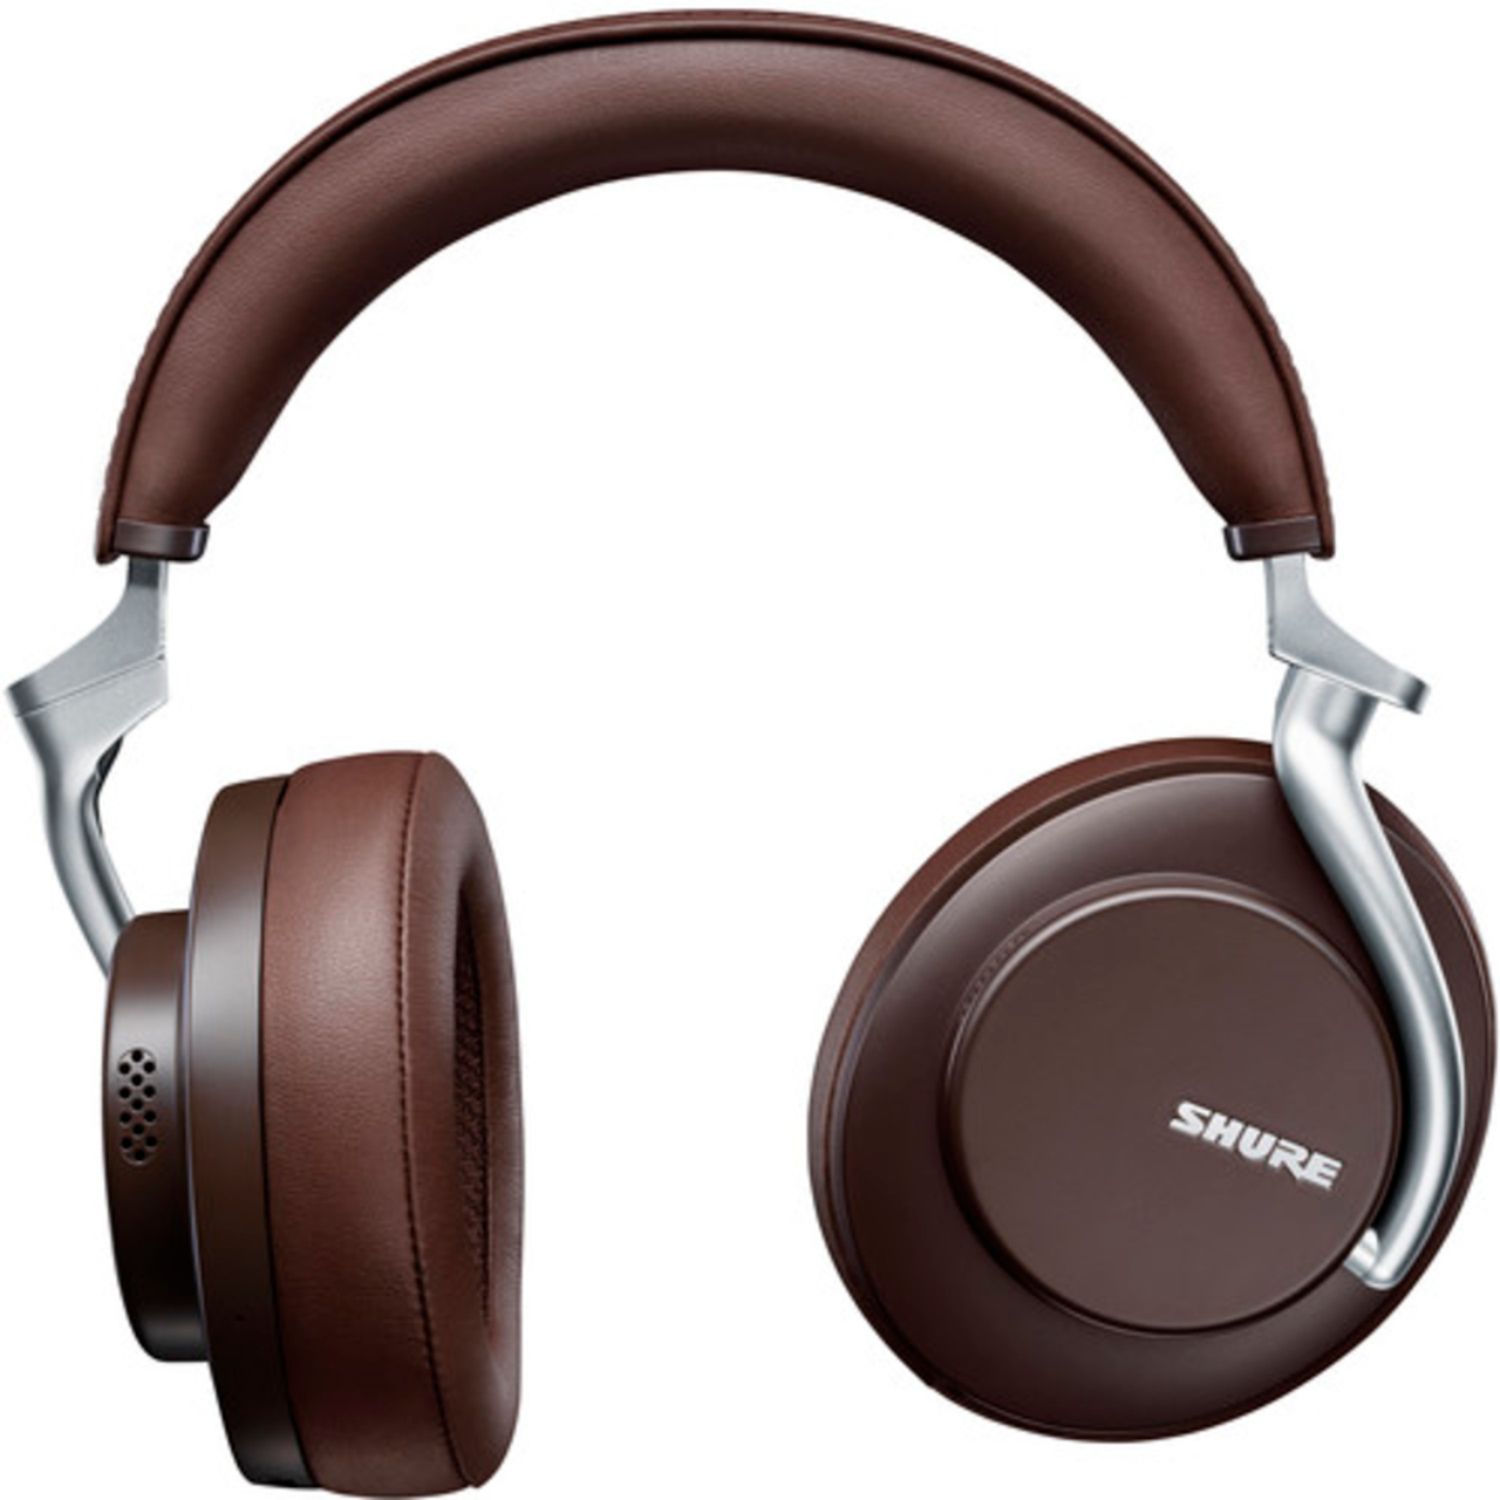 Angle View: Shure - AONIC 50 Wireless Noise Canceling Headphones - Brown